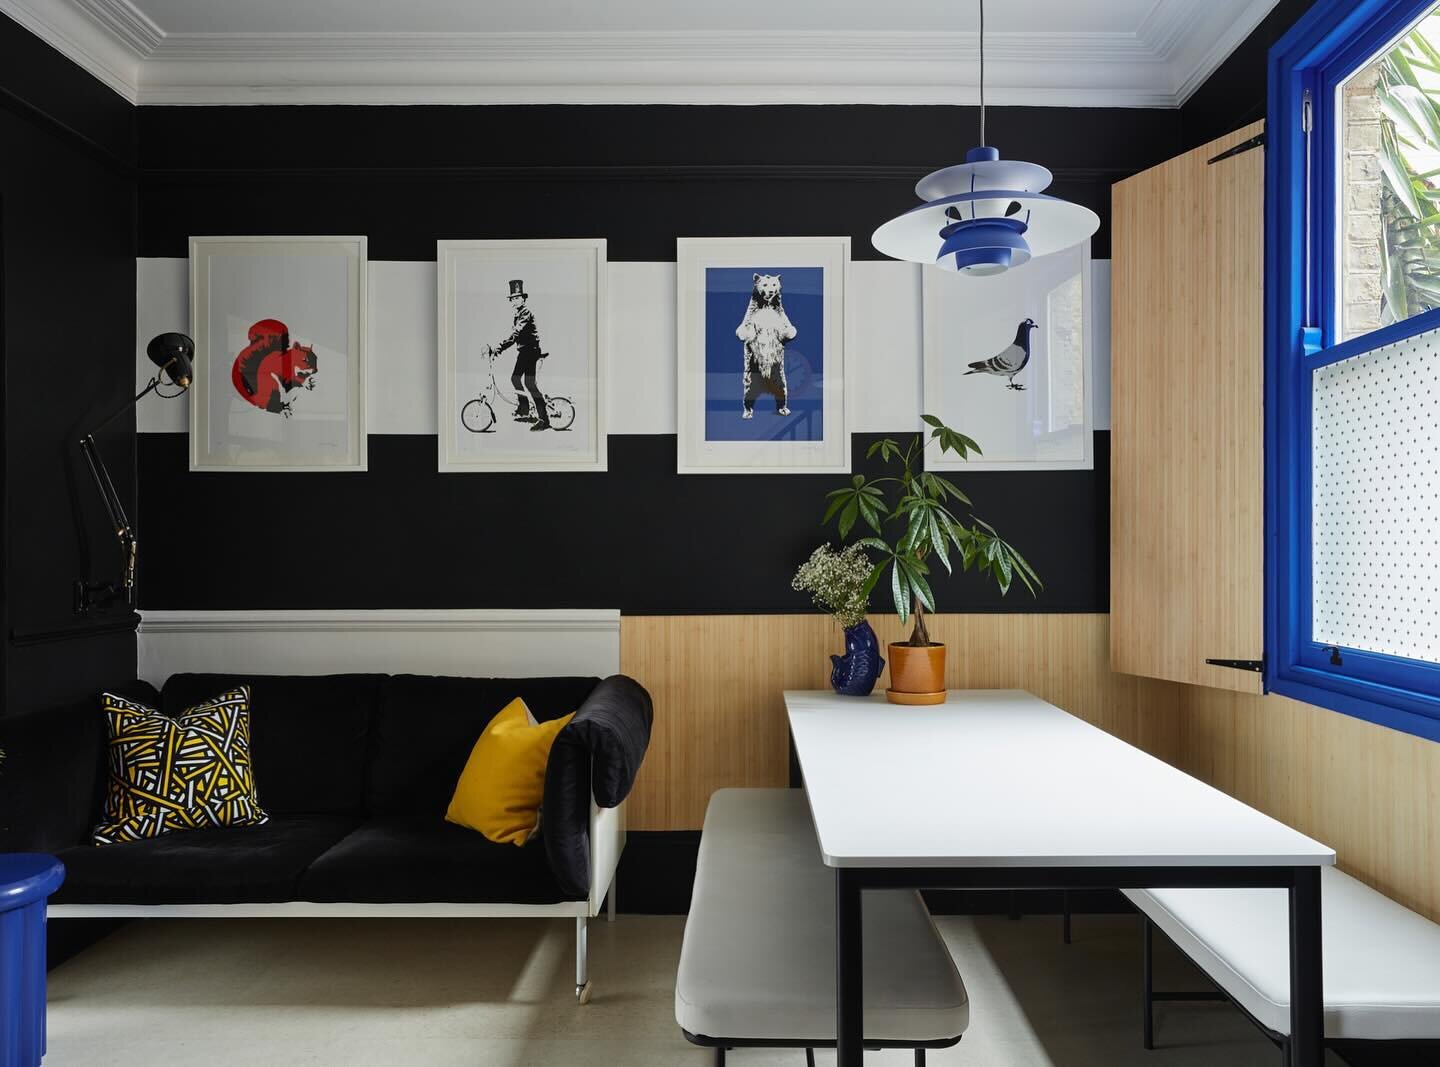 Probably the most dramatic room in the house. Hugely influenced by the love of art, the Memphis movement, Camille walala, monochrome and the need for clean, uncluttered surfaces. 

The danger for this room, because it leads into the more formal livin